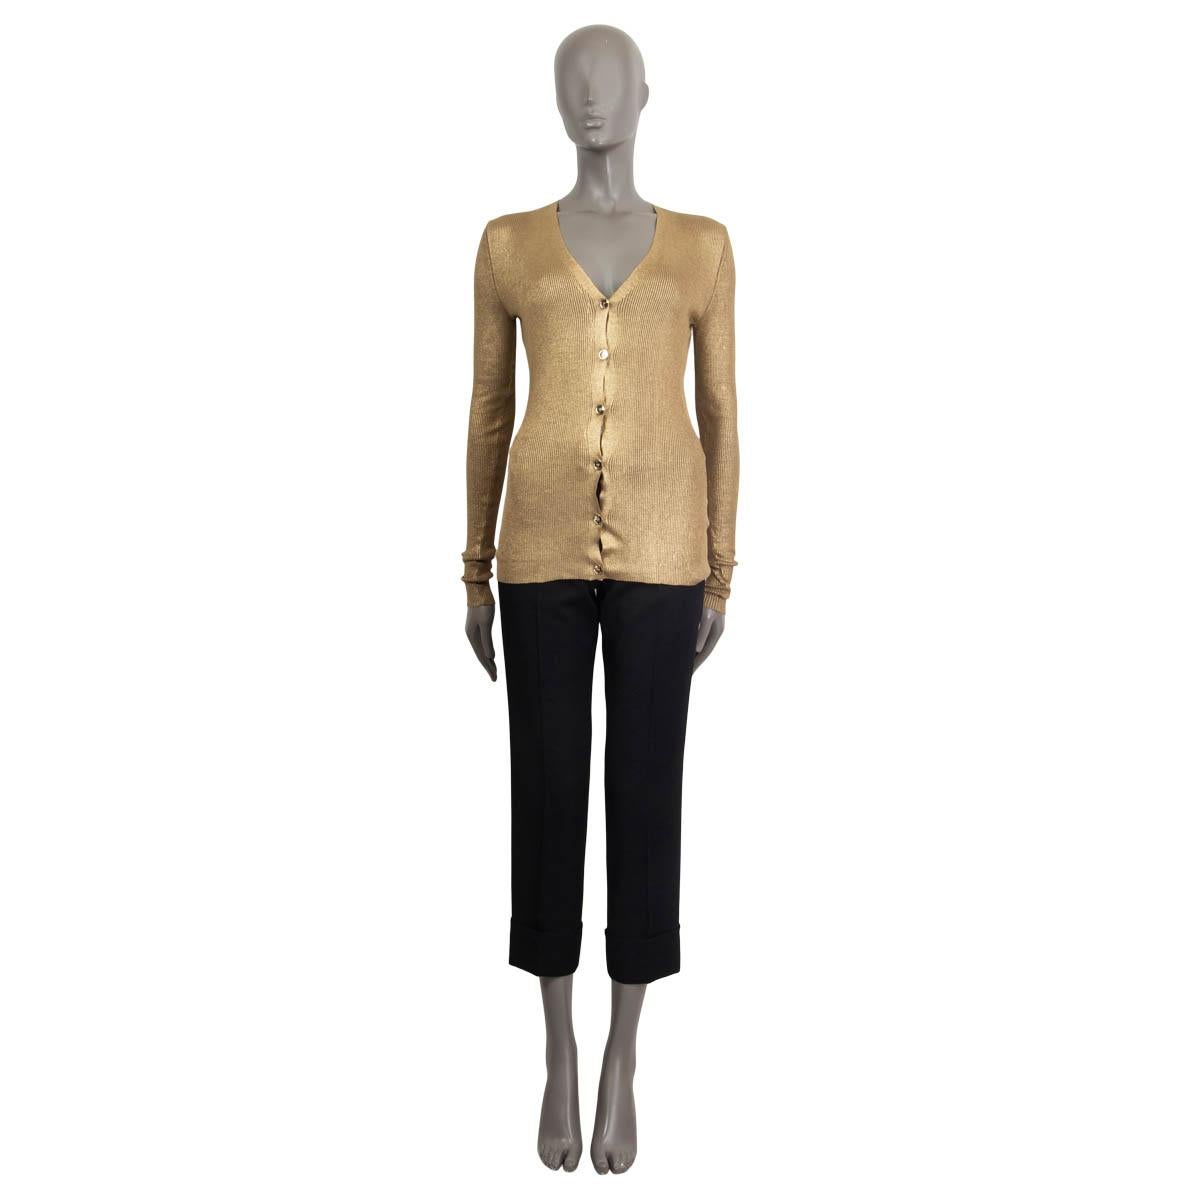 100% authentic Stella McCartney metallic ribbed cardigan in gold cotton (100%). Opens with six golden buttons on the front. Unlined. Has been worn and is in excellent condition.

Measurements
Tag Size	40
Size	S
Shoulder Width	35cm (13.7in)
Bust	72cm